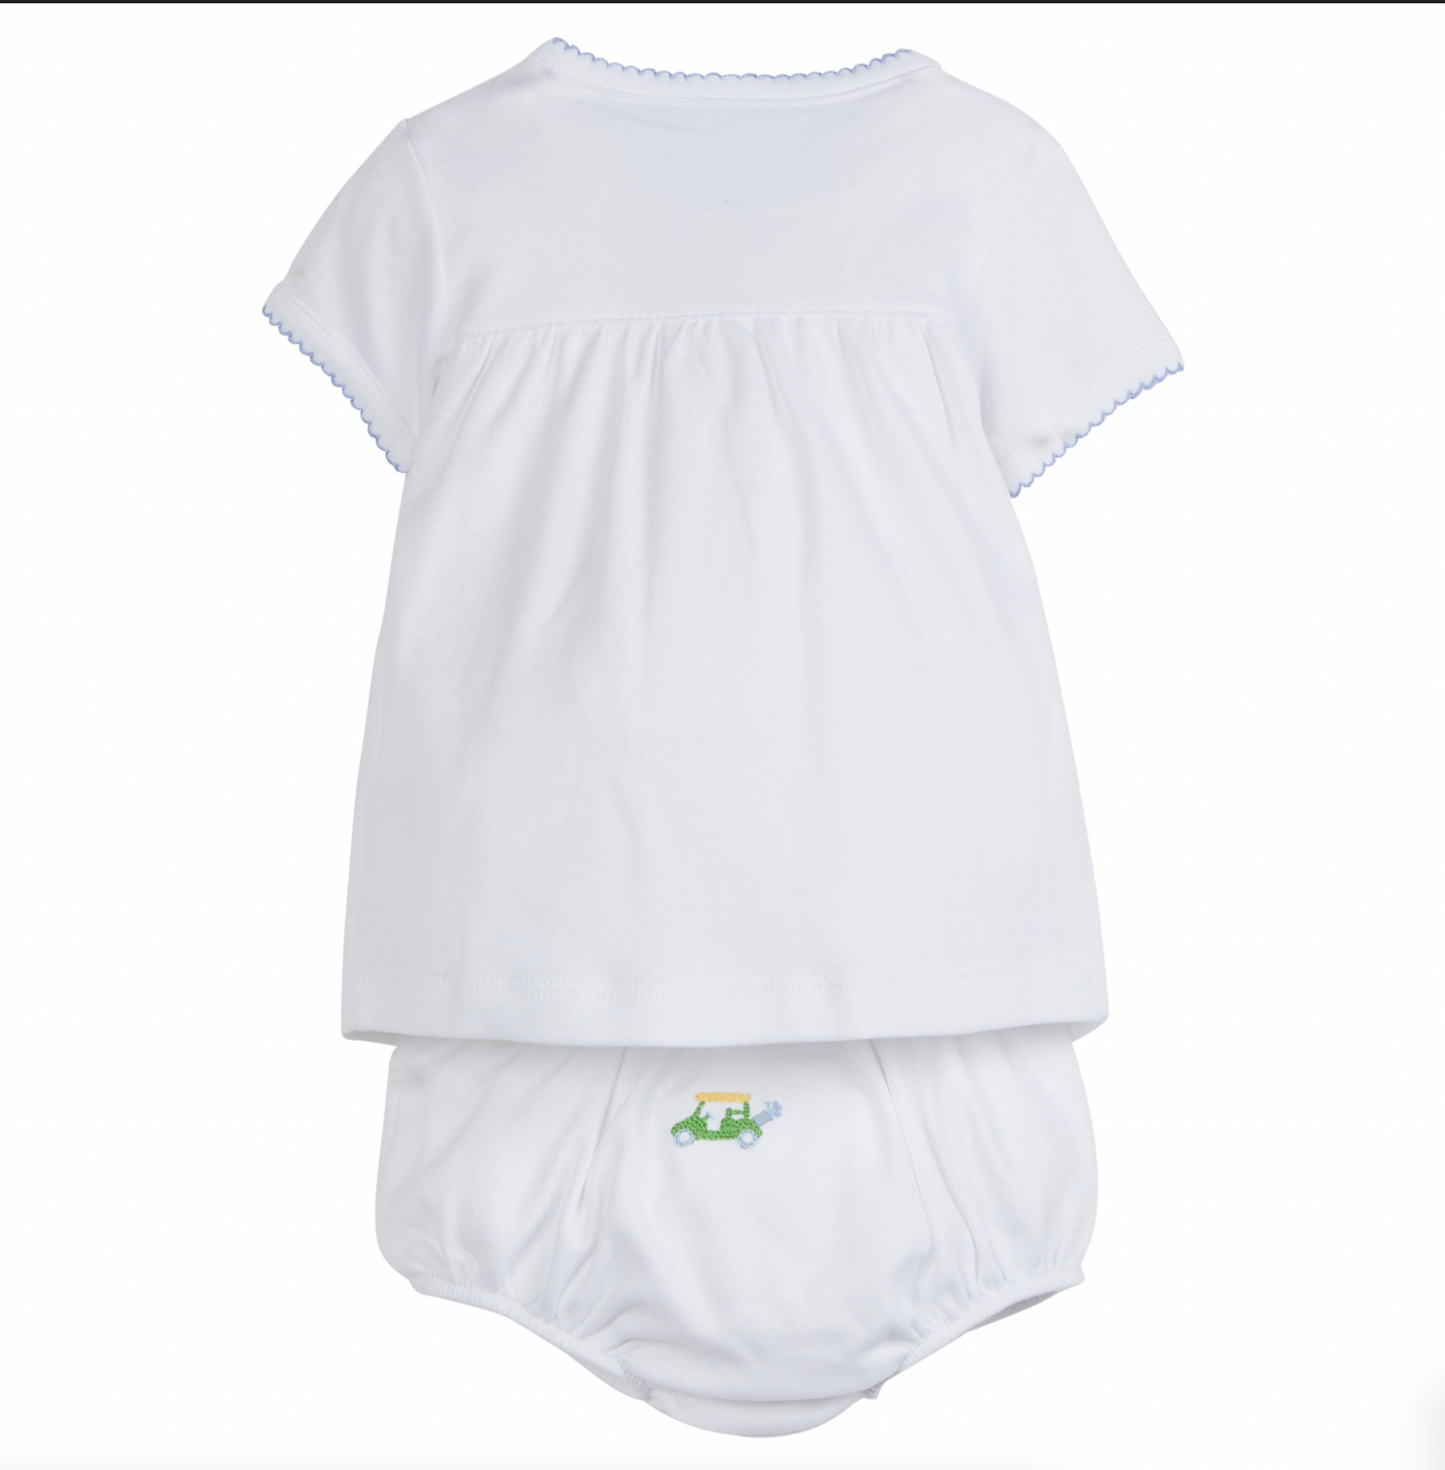 Little English Pinpoint Layette in Golf Cart